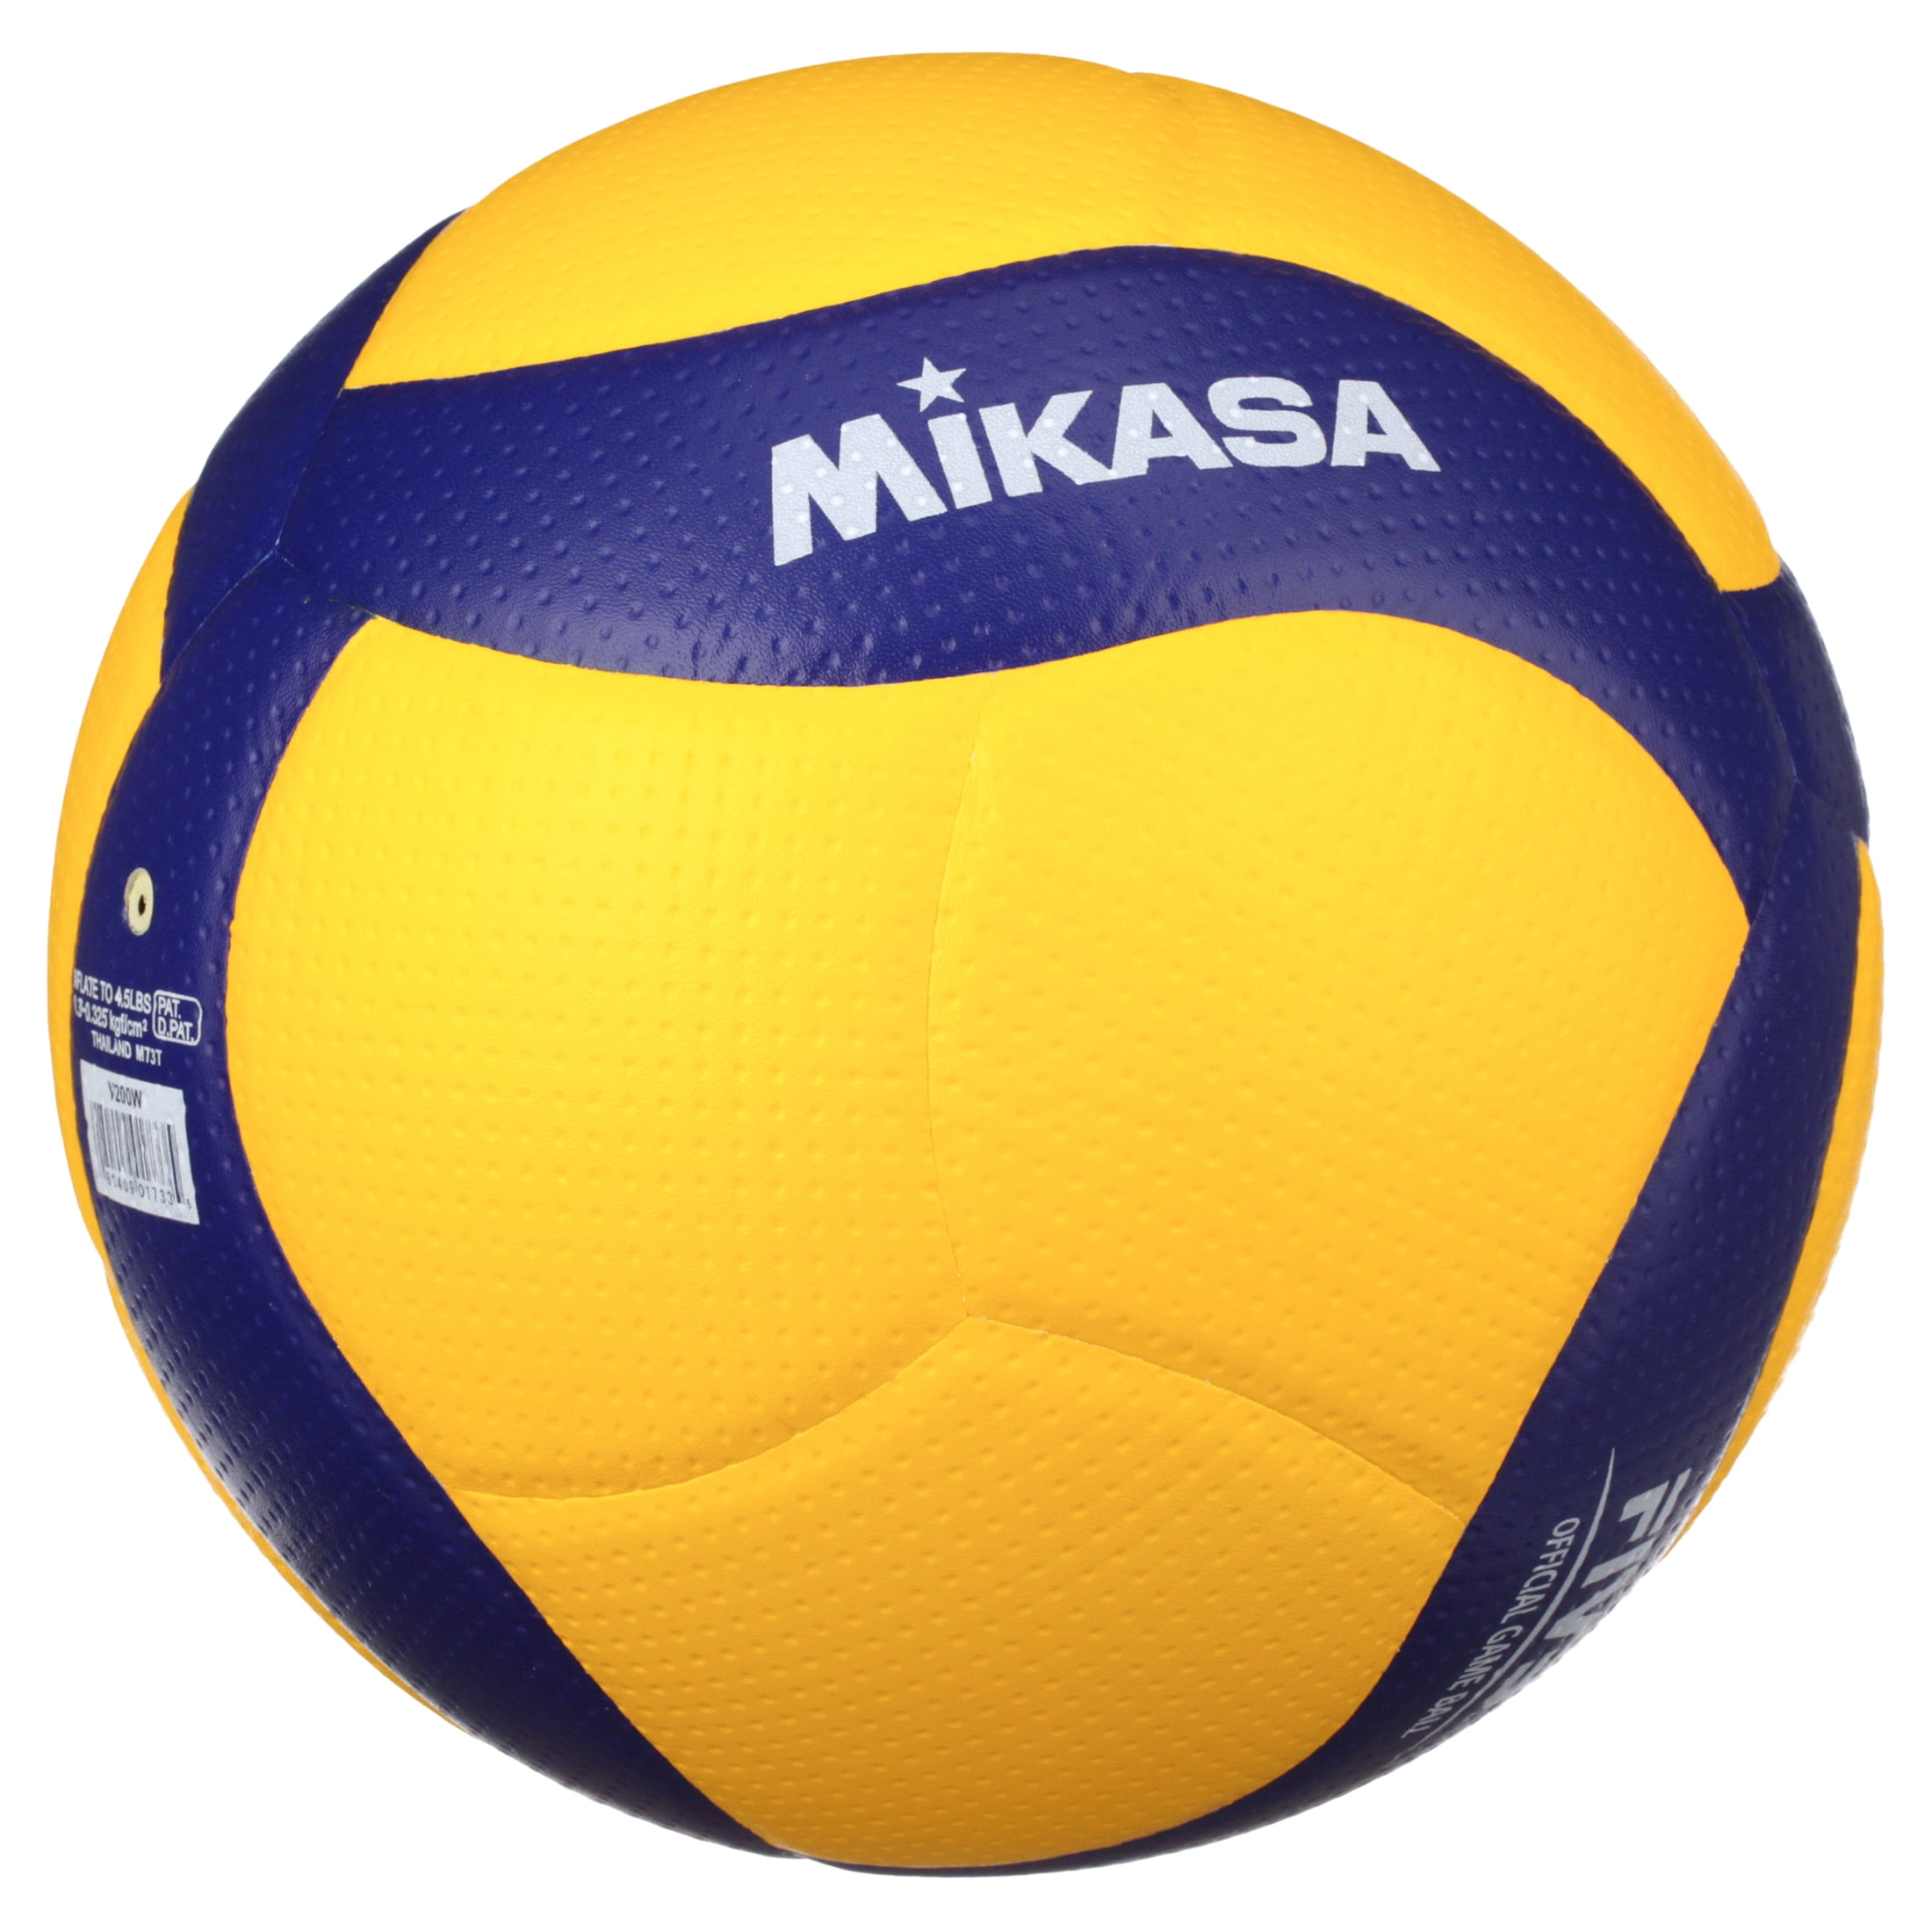 New Mikasa V200W Official FIVB Indoor Game Ball Olympic Professional Volleyball 